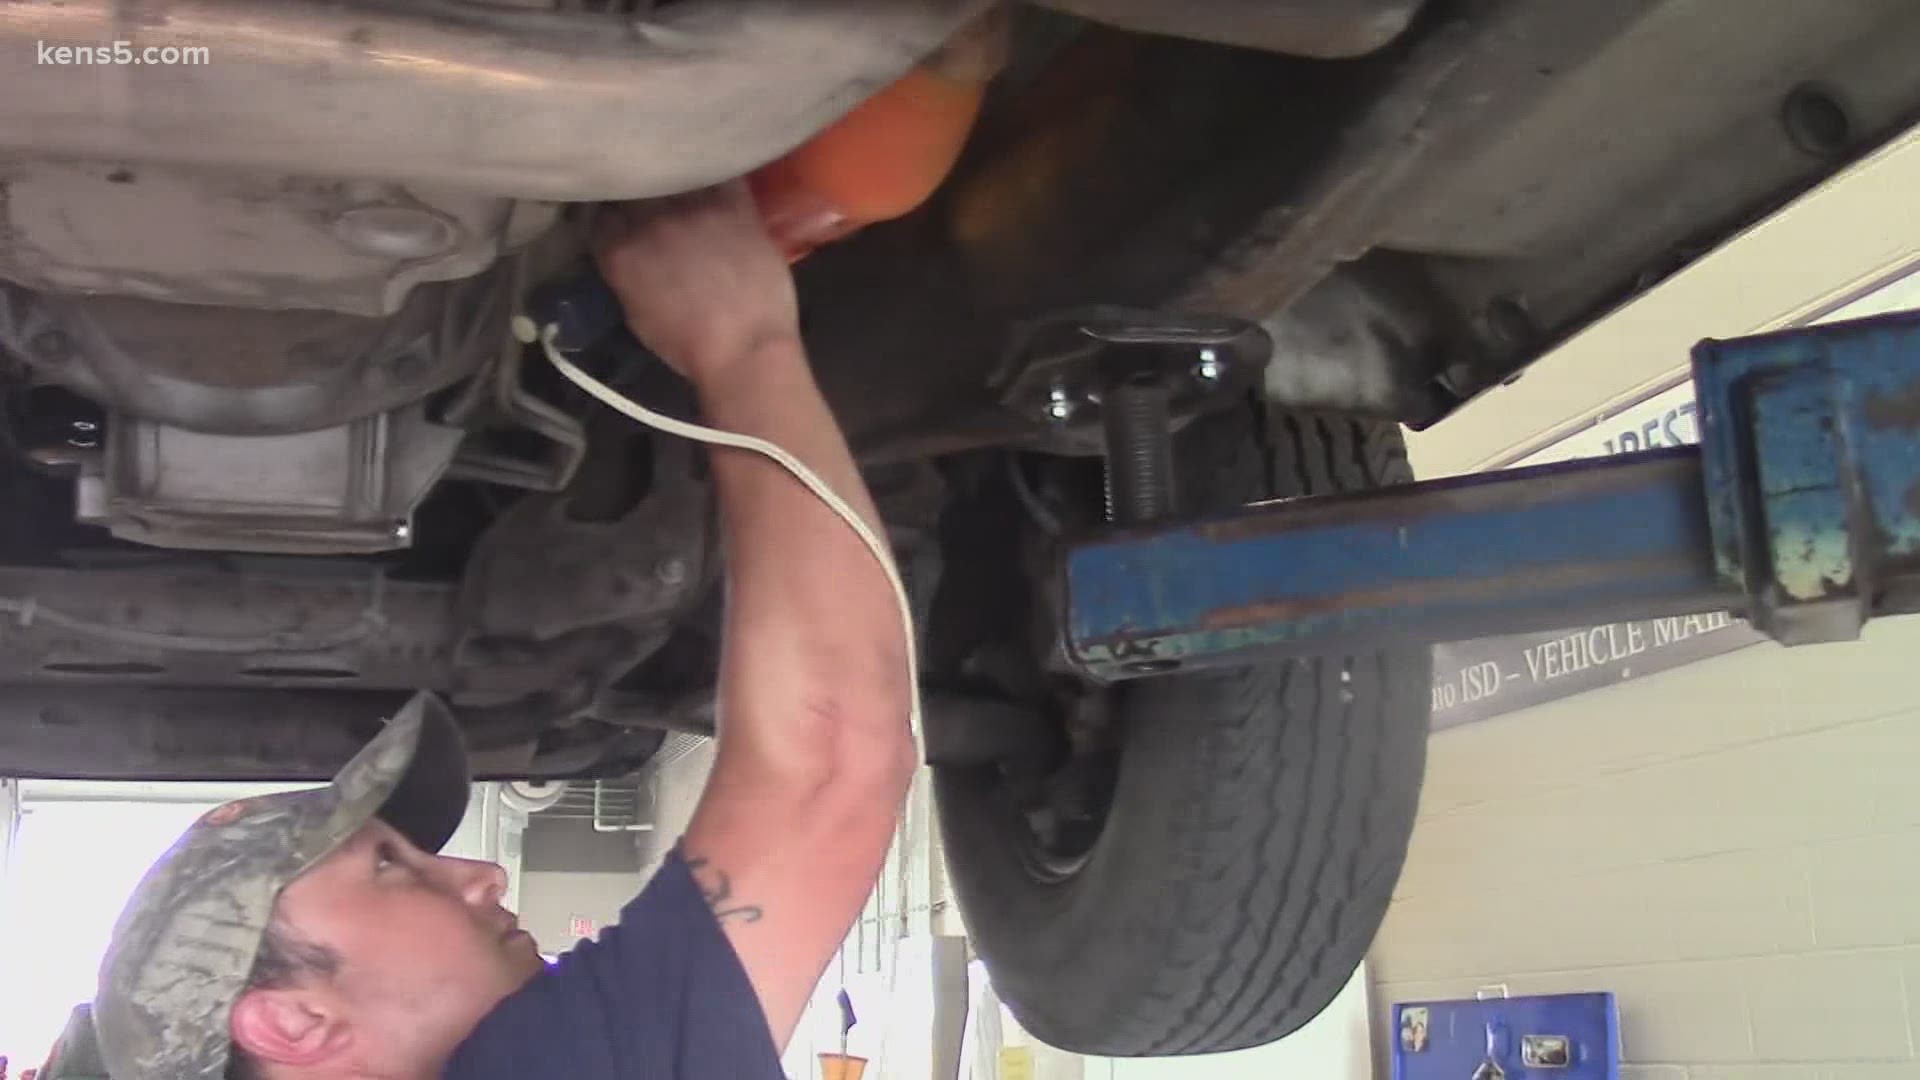 The district is now taking steps to prevent future catalytic converter thefts.